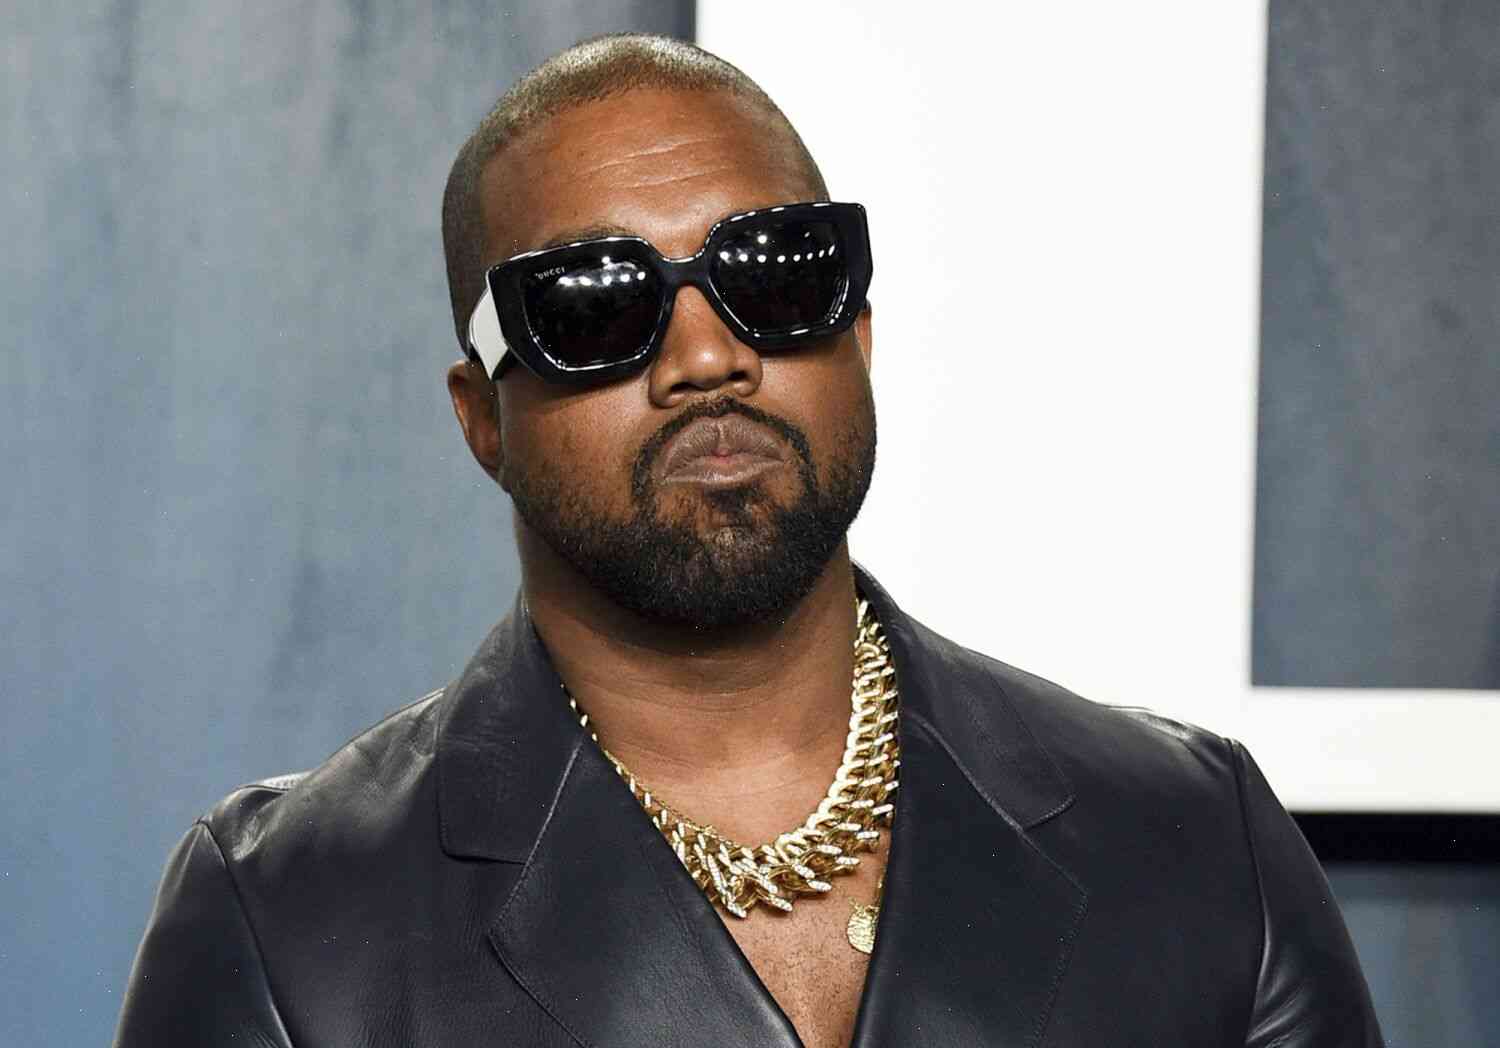 Kanye West is not a white nationalist, and he was not a Holocaust denier